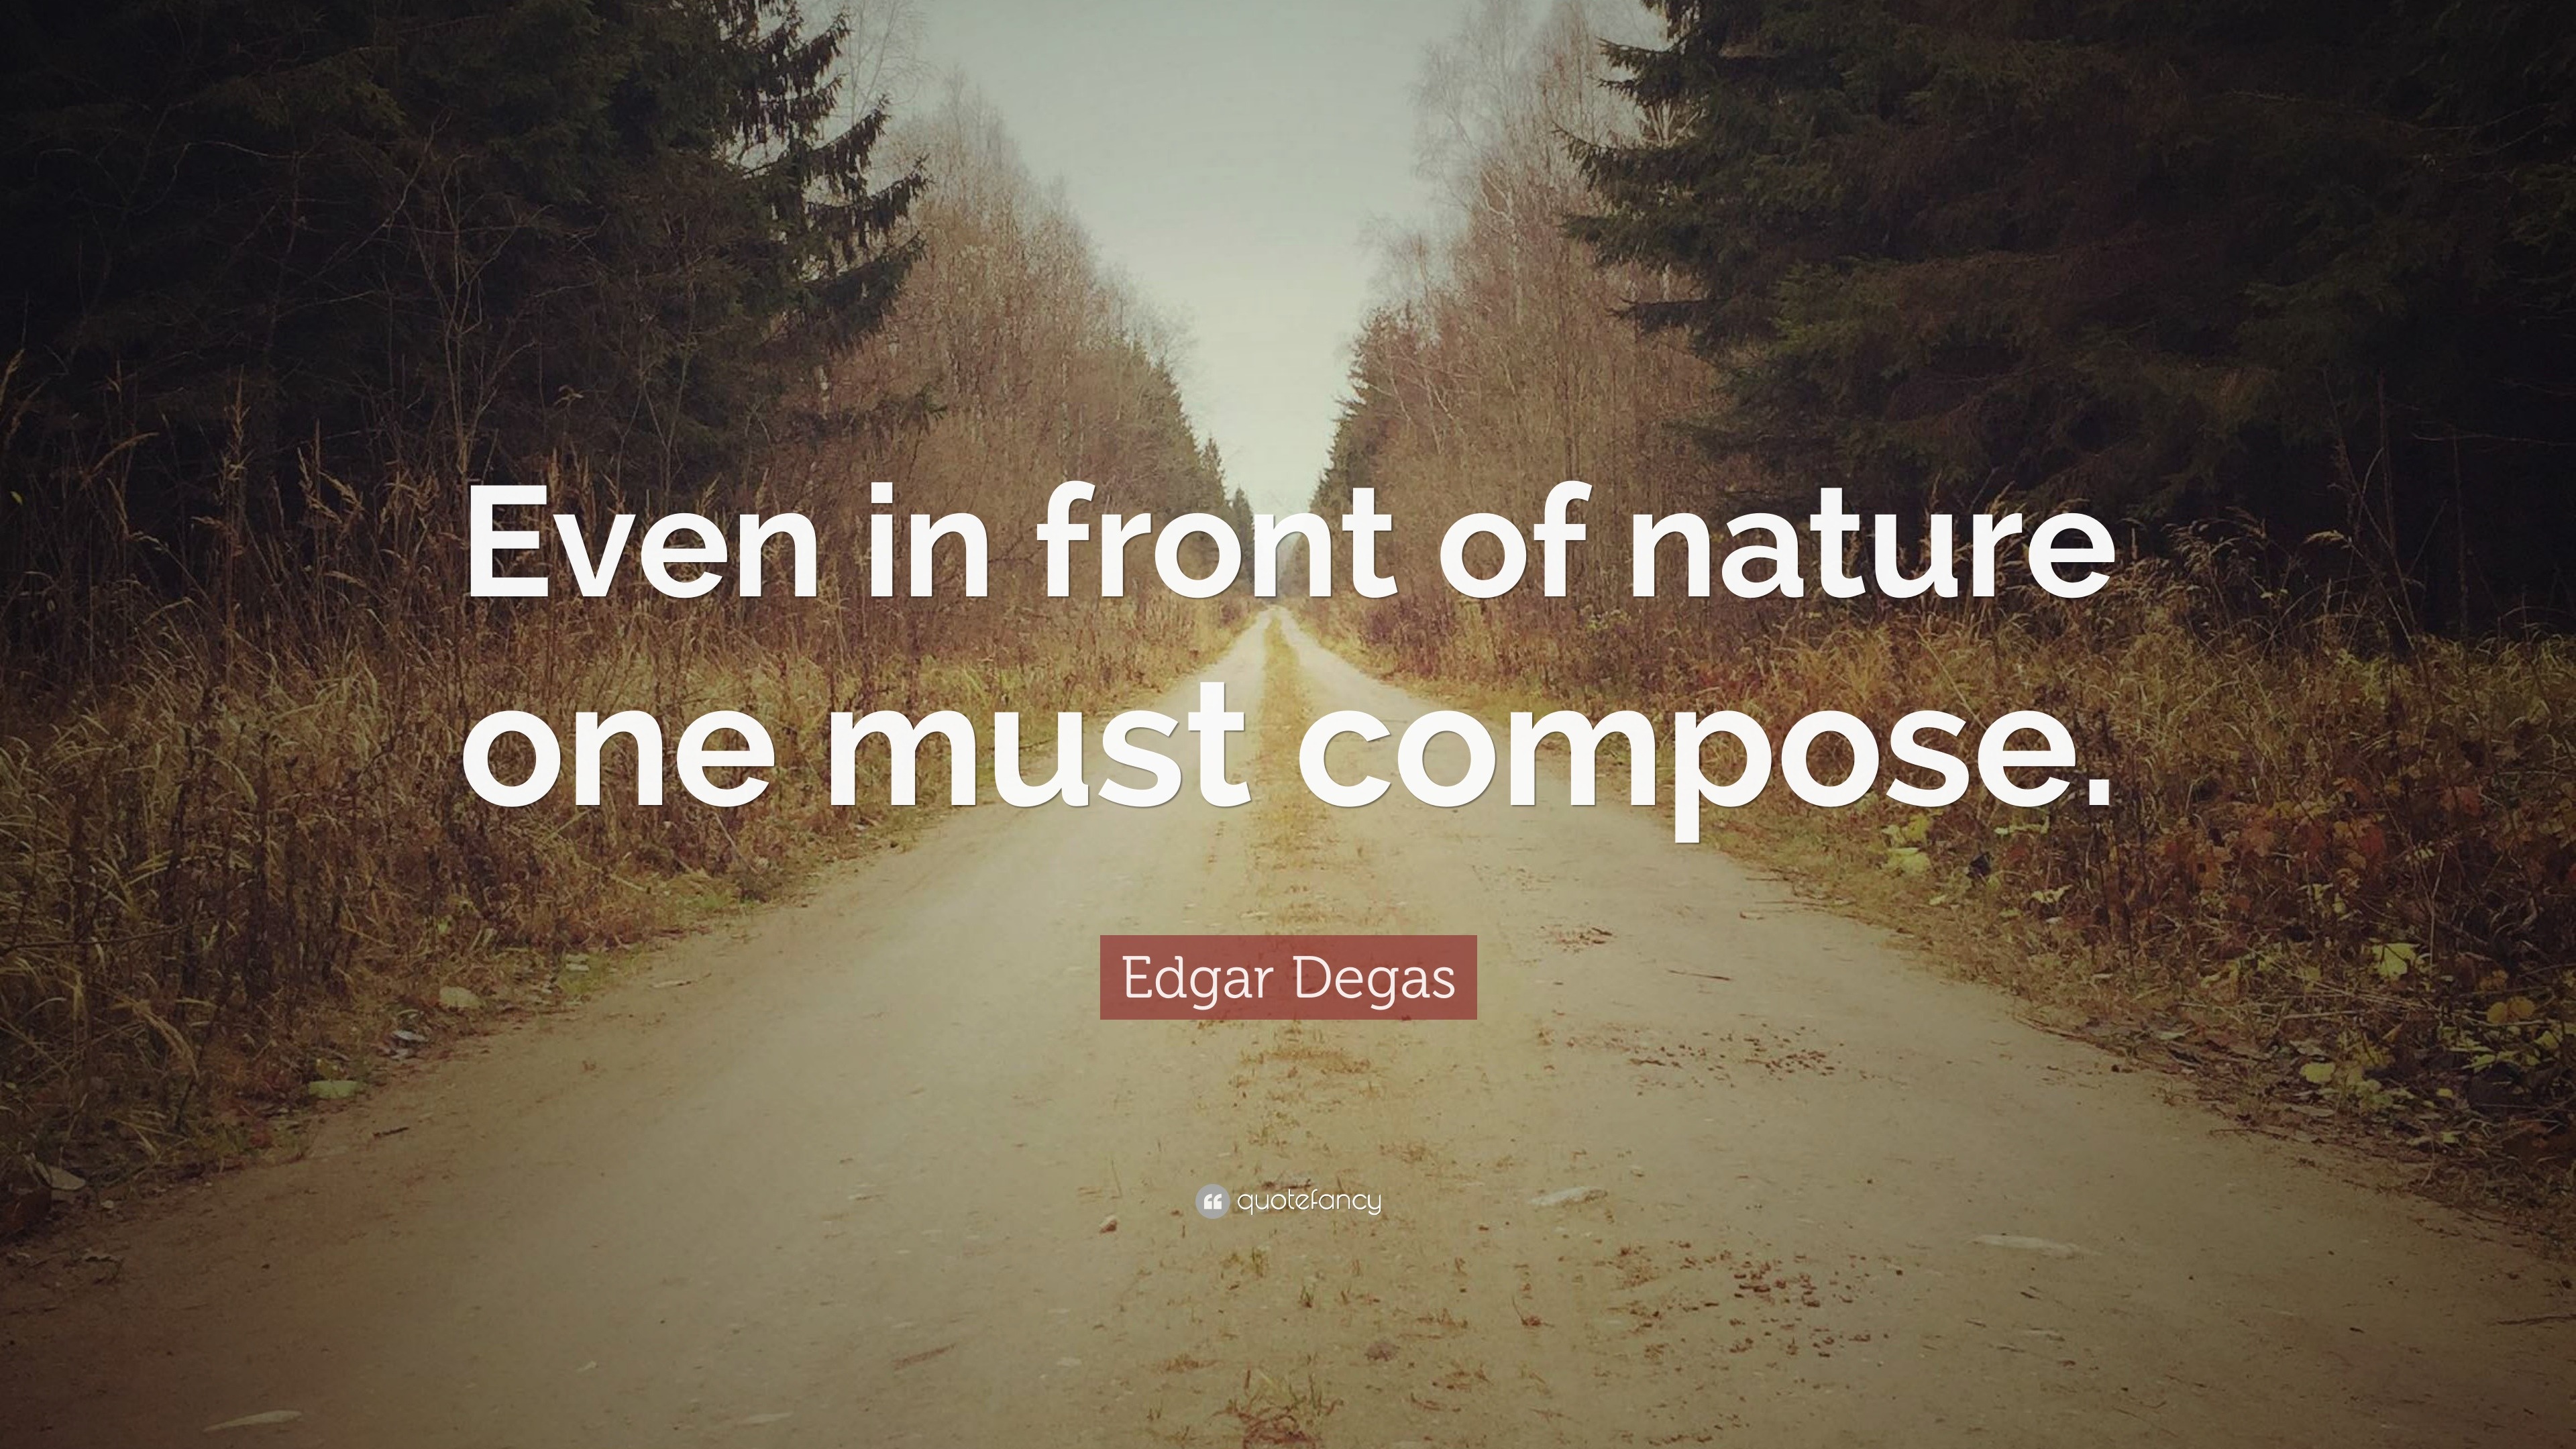 Edgar Degas Quote: “Even in of nature compose.”